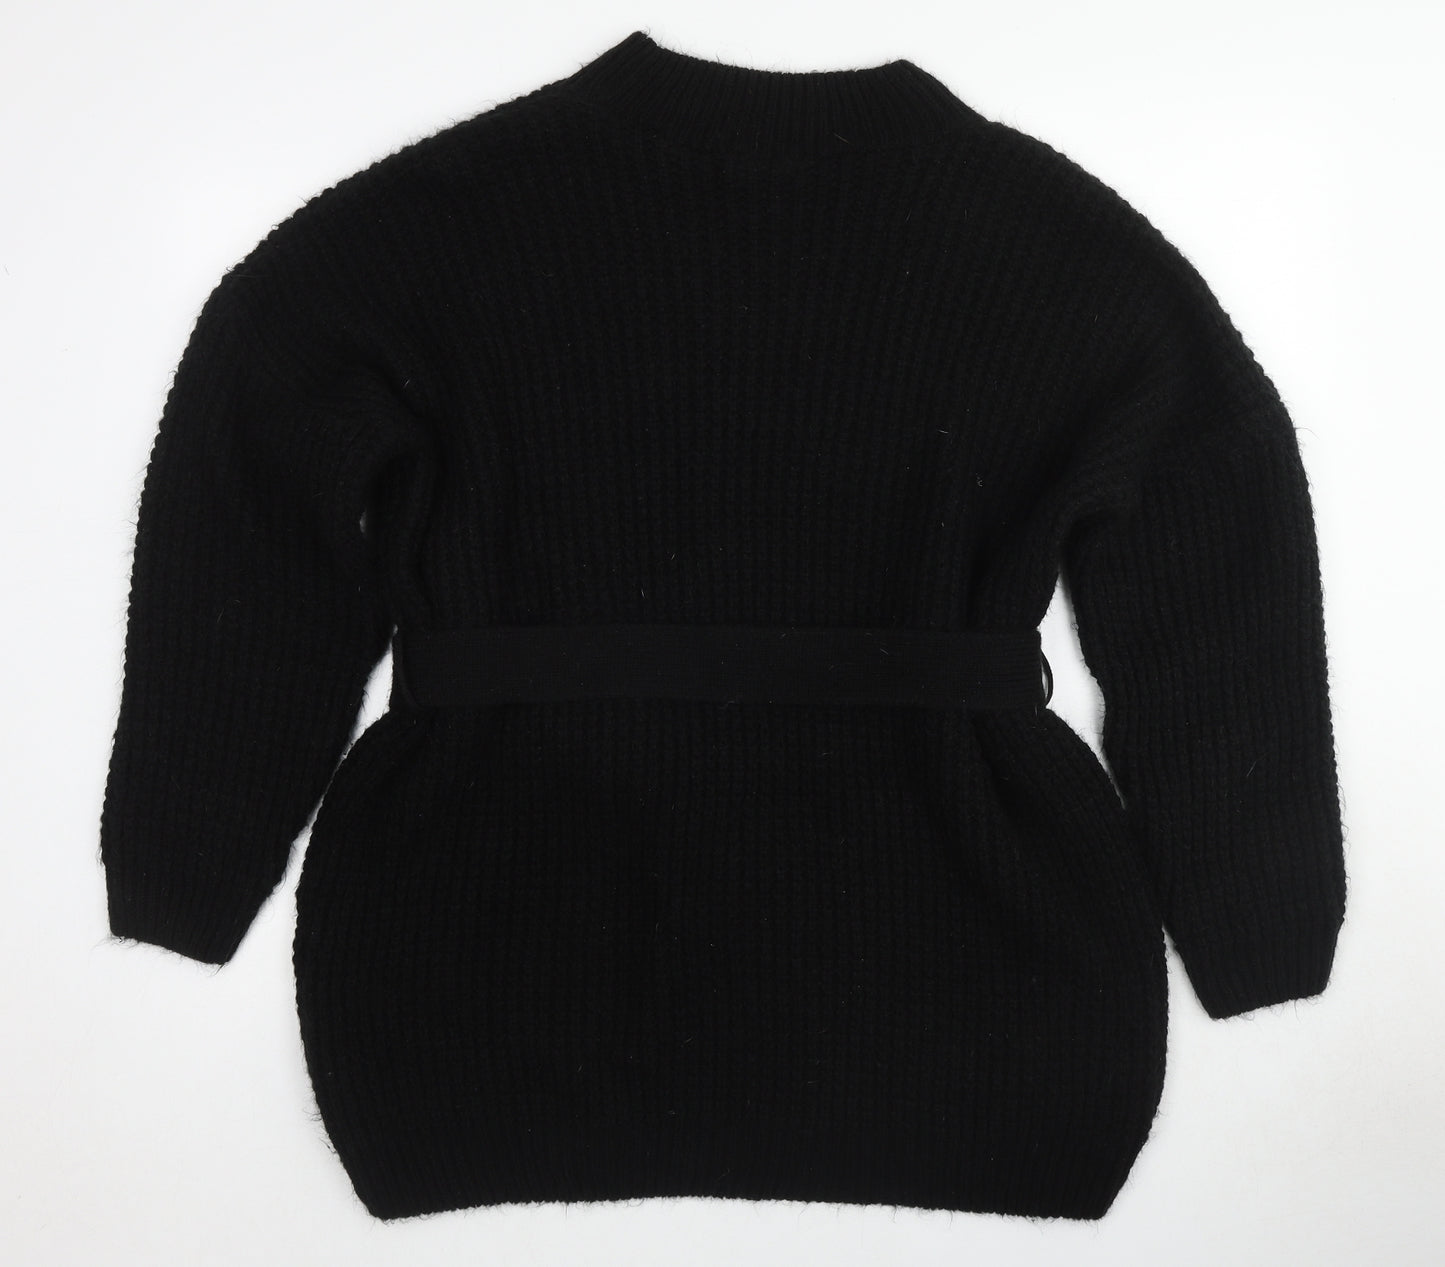 PRETTYLITTLETHING Womens Black Round Neck Acrylic Pullover Jumper Size L